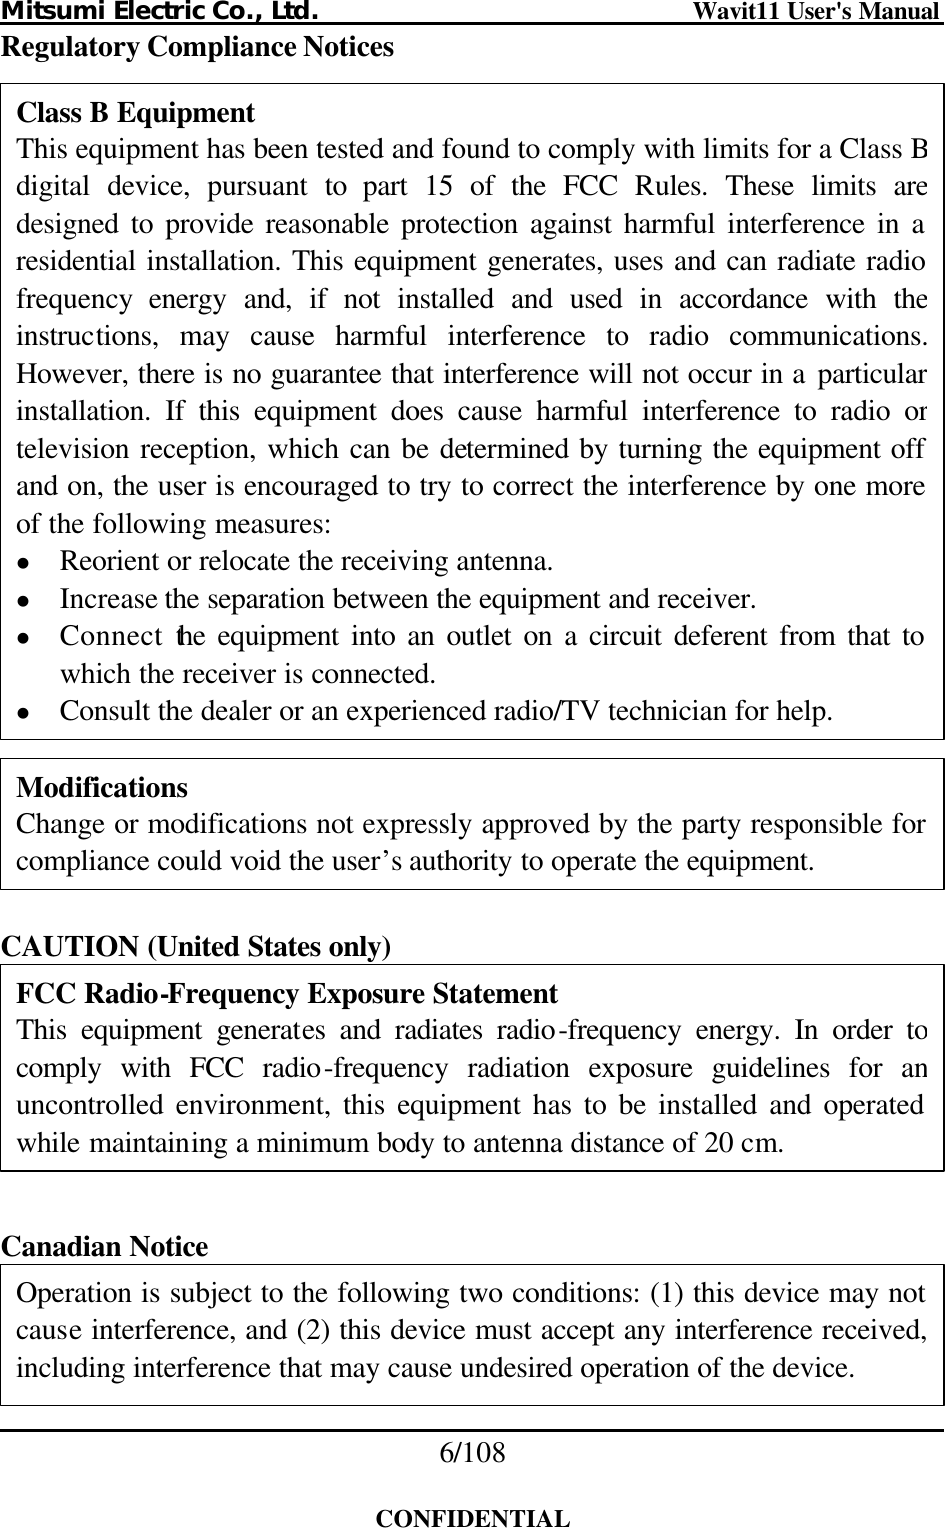 Mitsumi Electric Co., Ltd.                              Wavit11 User&apos;s Manual 6/108  CONFIDENTIAL Regulatory Compliance Notices                        CAUTION (United States only)        Canadian Notice     FCC Radio-Frequency Exposure Statement This equipment generates and radiates radio-frequency energy. In order to comply with FCC radio-frequency radiation exposure guidelines for an uncontrolled environment, this equipment has to be installed and operated while maintaining a minimum body to antenna distance of 20 cm. Operation is subject to the following two conditions: (1) this device may not cause interference, and (2) this device must accept any interference received, including interference that may cause undesired operation of the device. Modifications Change or modifications not expressly approved by the party responsible for compliance could void the user’s authority to operate the equipment. Class B Equipment This equipment has been tested and found to comply with limits for a Class Bdigital device, pursuant to part 15 of the FCC Rules. These limits are designed to provide reasonable protection against harmful interference in a residential installation. This equipment generates, uses and can radiate radio frequency energy and, if not installed and used in accordance with the instructions, may cause harmful interference to radio communications. However, there is no guarantee that interference will not occur in a particularinstallation. If this equipment does cause harmful interference to radio or television reception, which can be determined by turning the equipment off and on, the user is encouraged to try to correct the interference by one more of the following measures: l Reorient or relocate the receiving antenna. l Increase the separation between the equipment and receiver. l Connect the equipment into an outlet on a circuit deferent from that to which the receiver is connected. l Consult the dealer or an experienced radio/TV technician for help. 